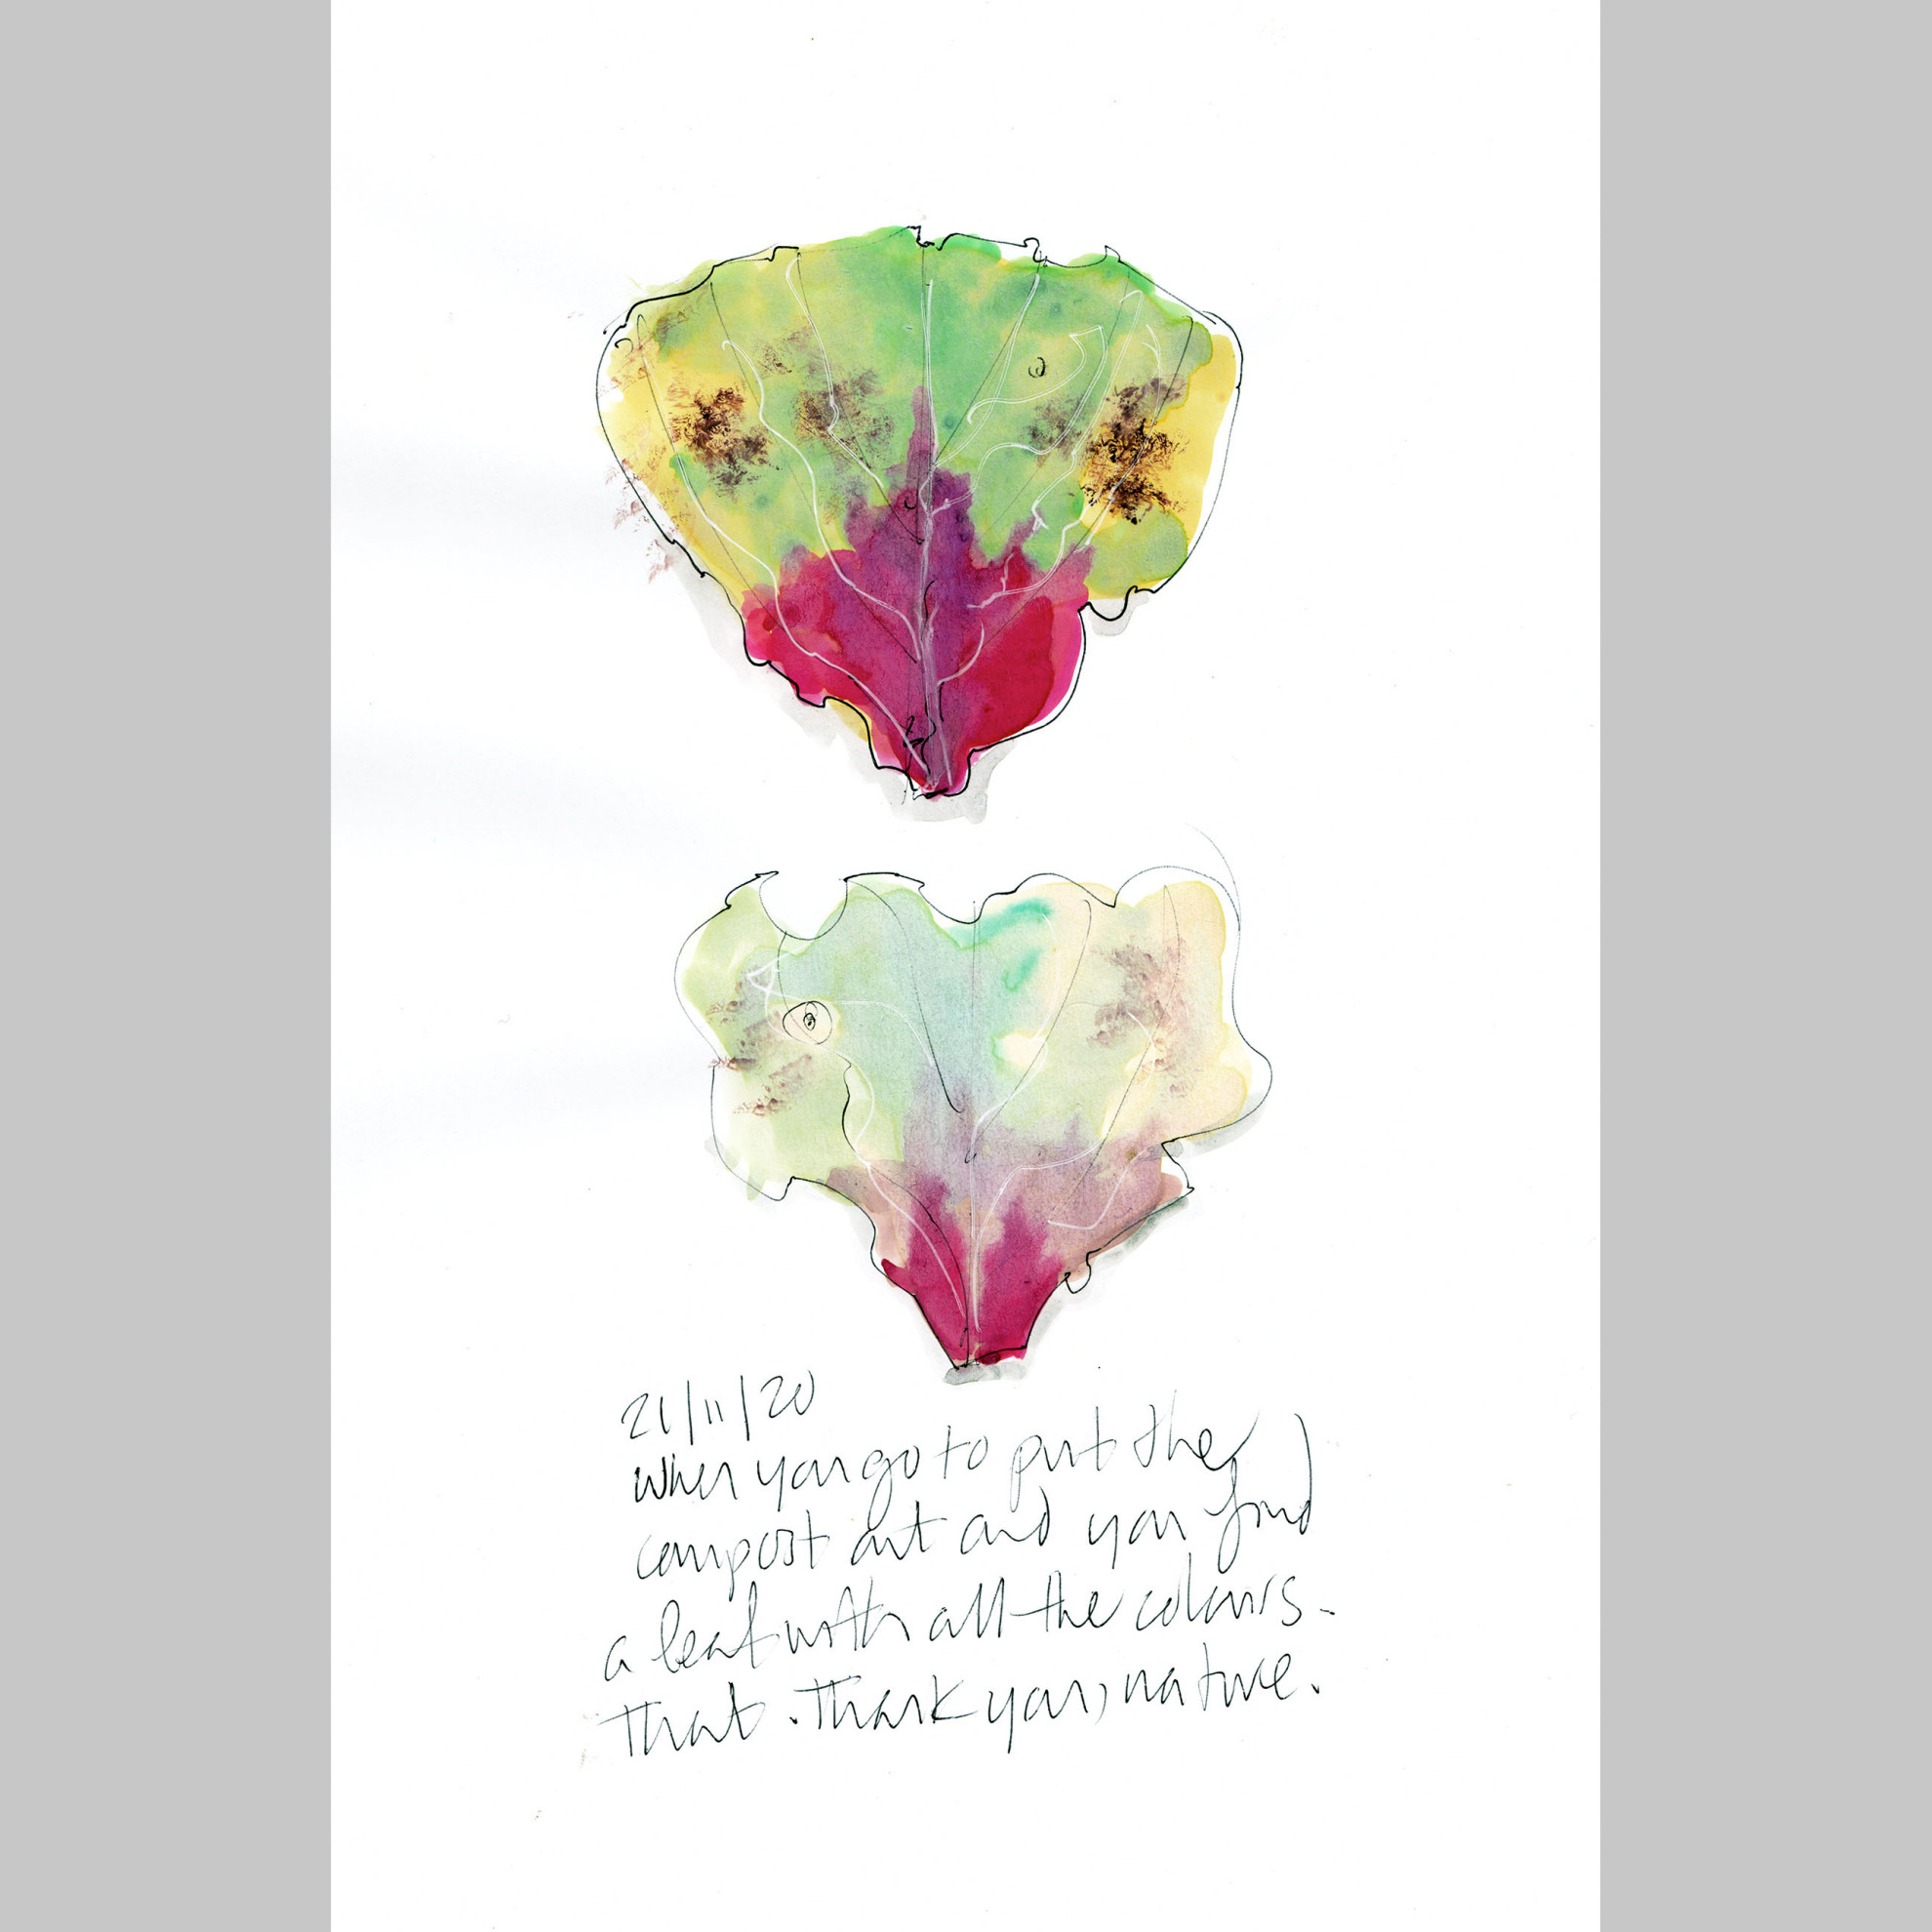 Leaf with all the colours 21.11.20 (An original sketch by Lydia Thornley)